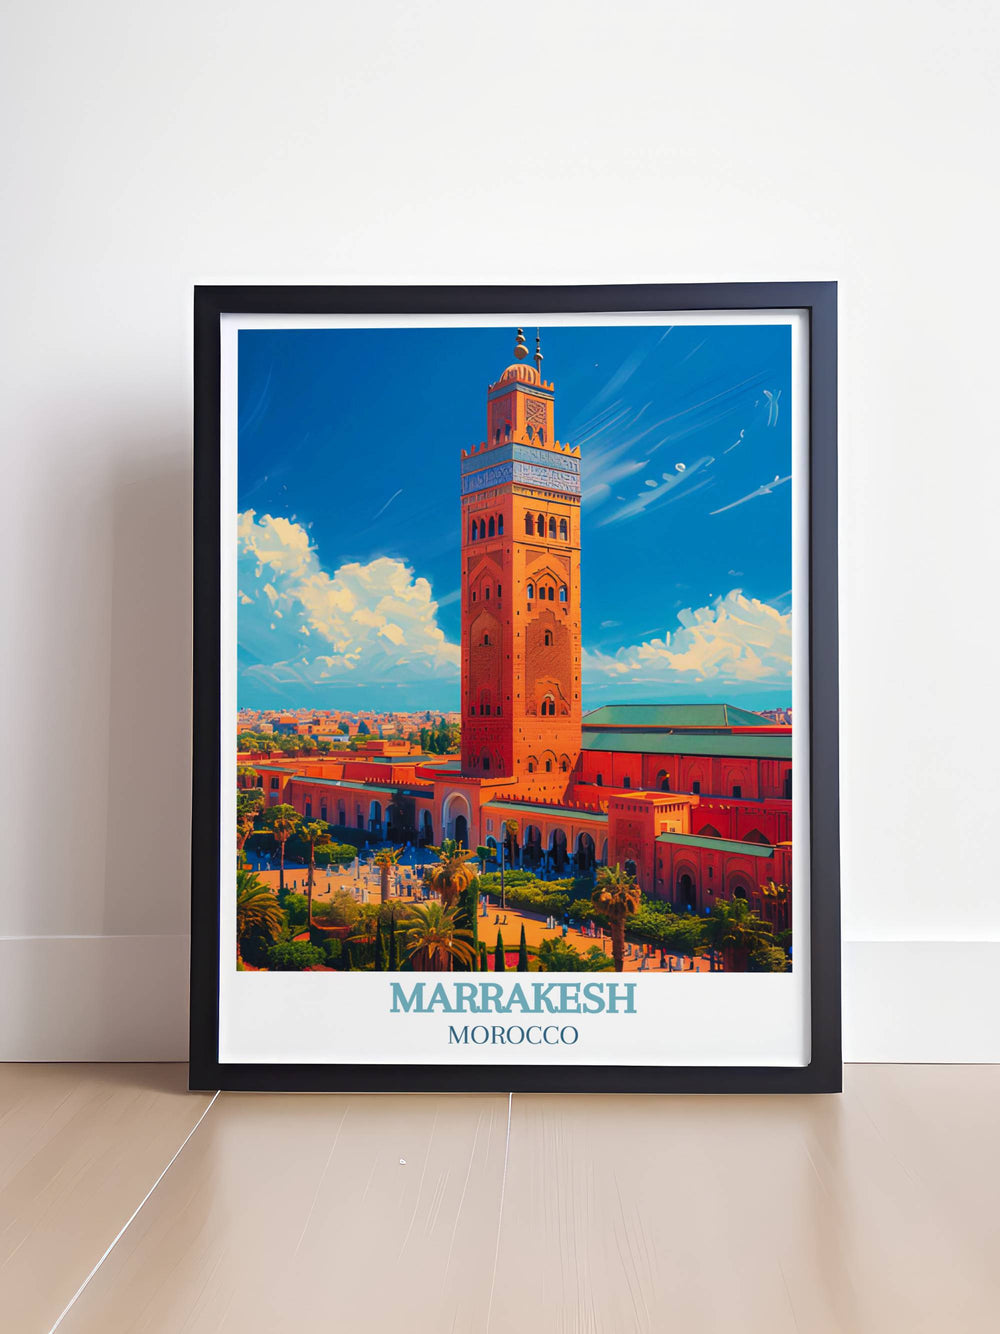 Framed art of Marrakesh showing detailed street views with vibrant market stalls and traditional Moroccan architecture.